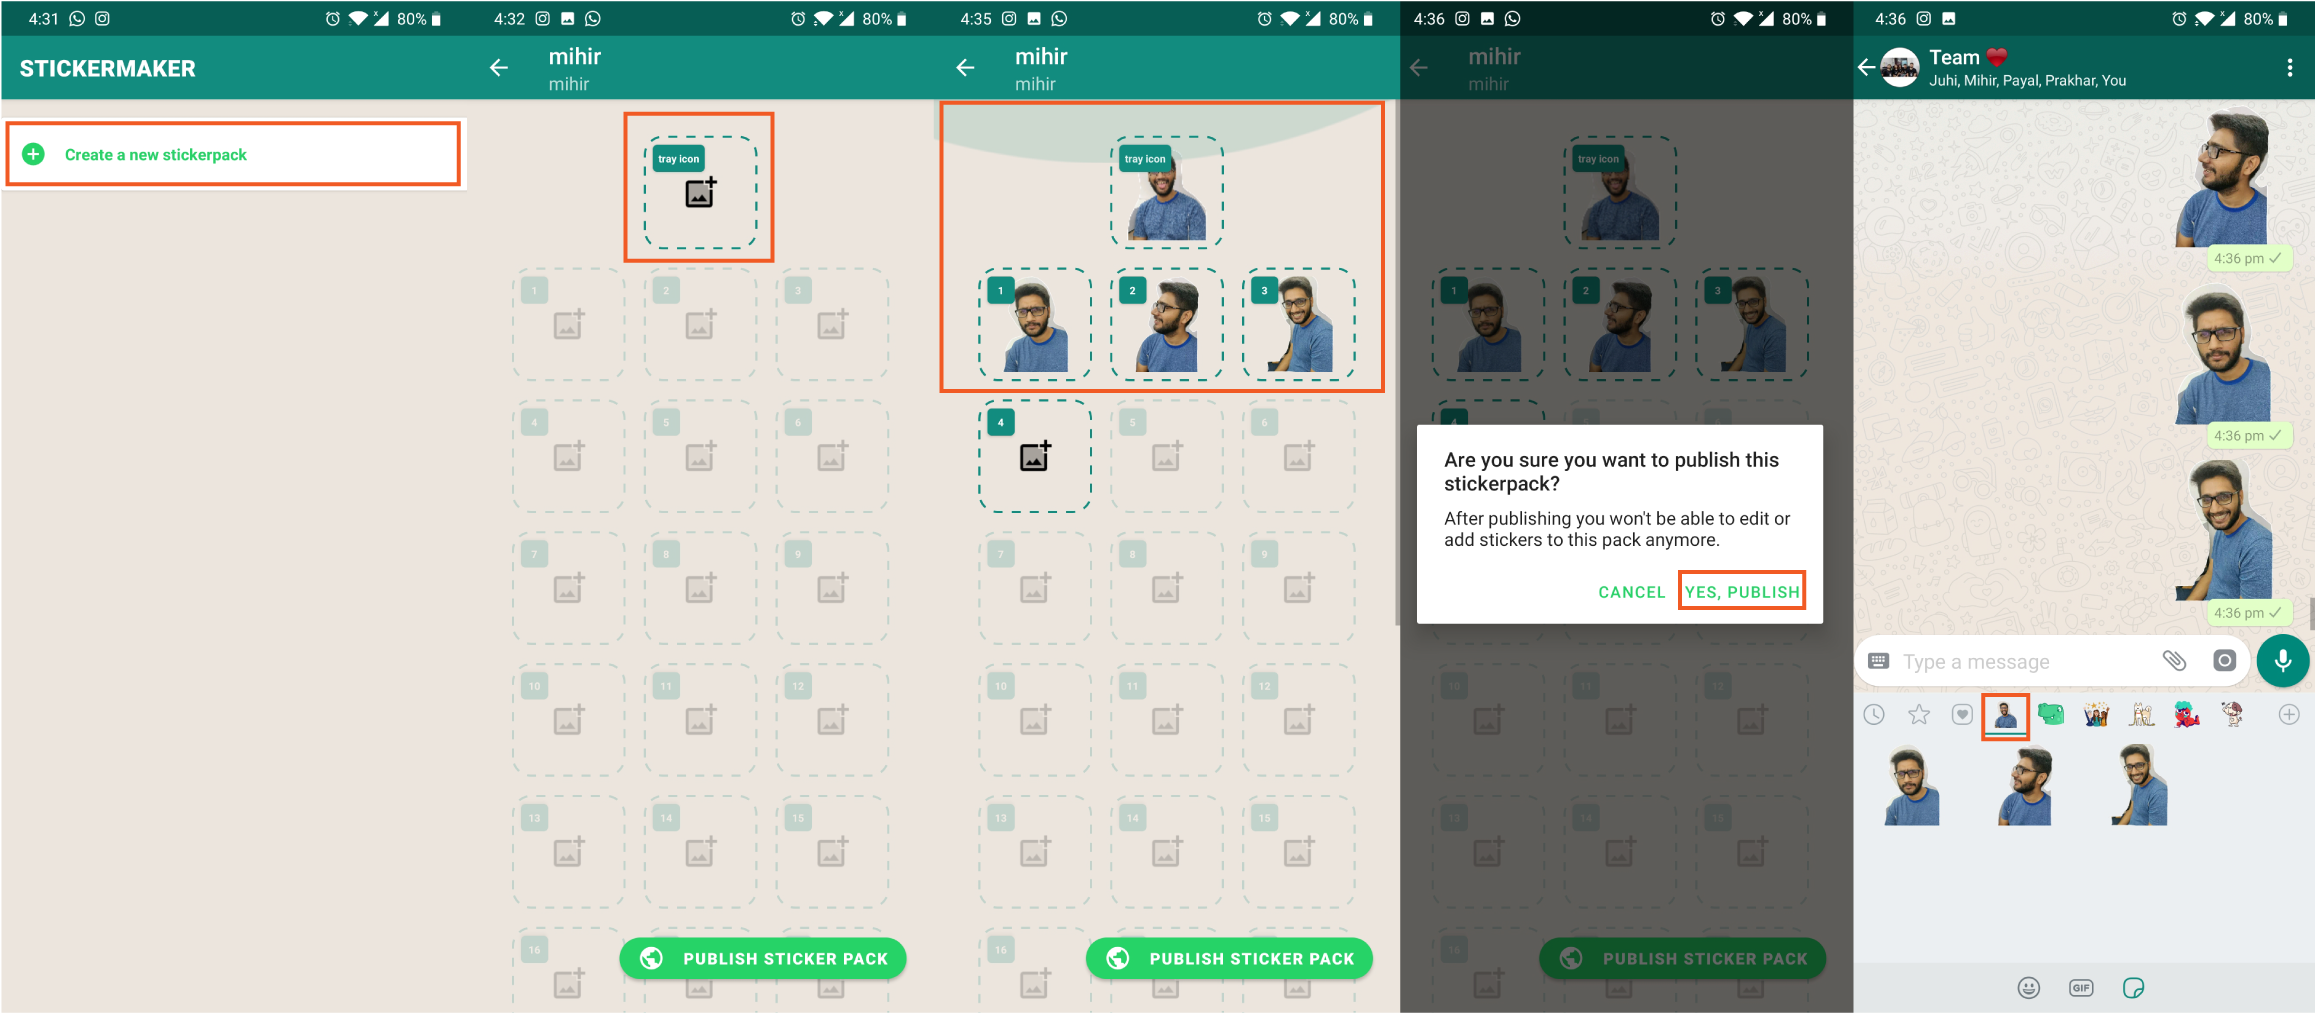 How To Make Custom Whatsapp Stickers On Android 3nions